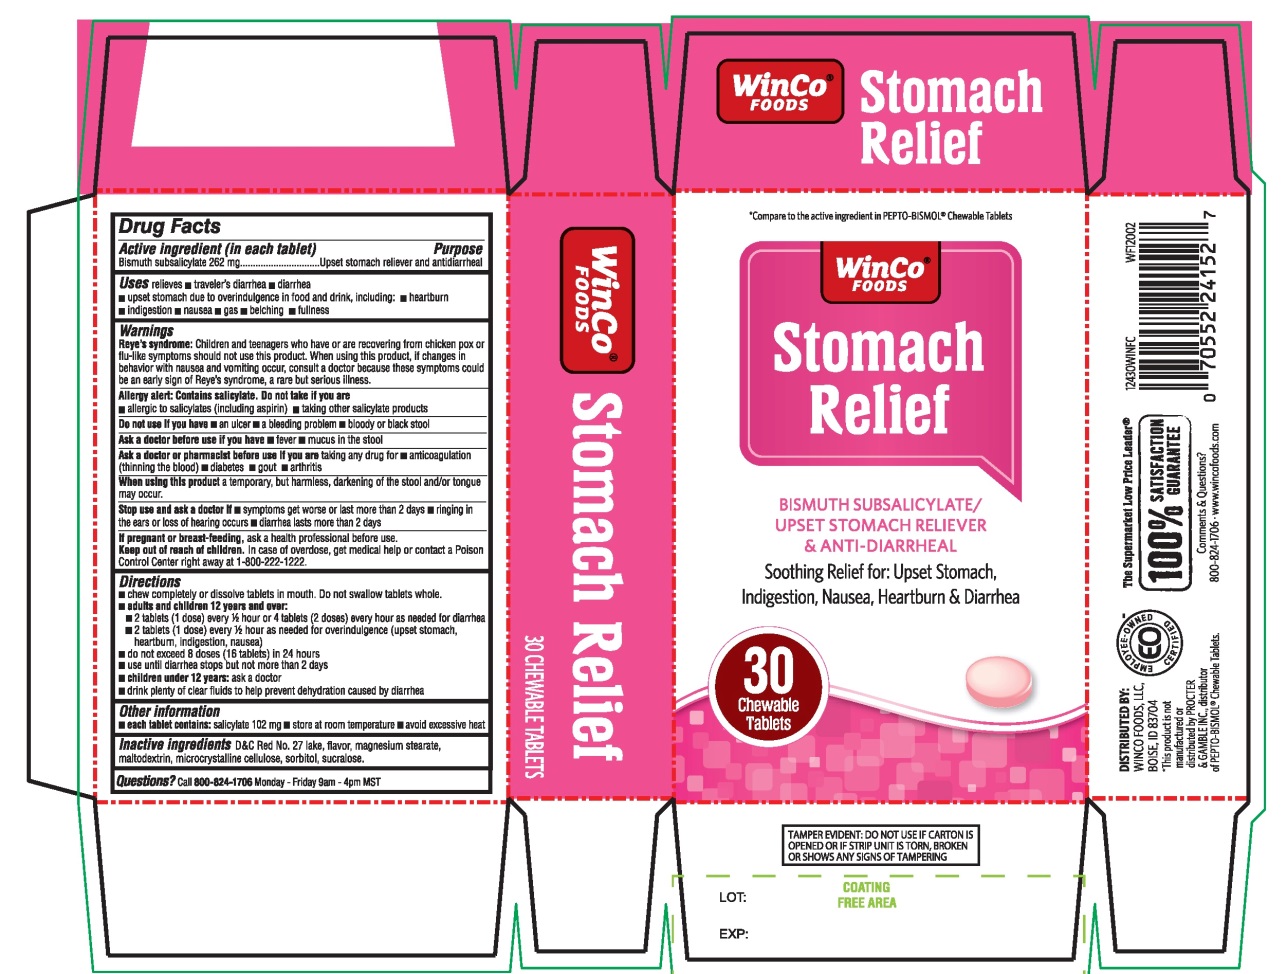 Winco FOODS Stomach Relief 30 Chewable Tablets